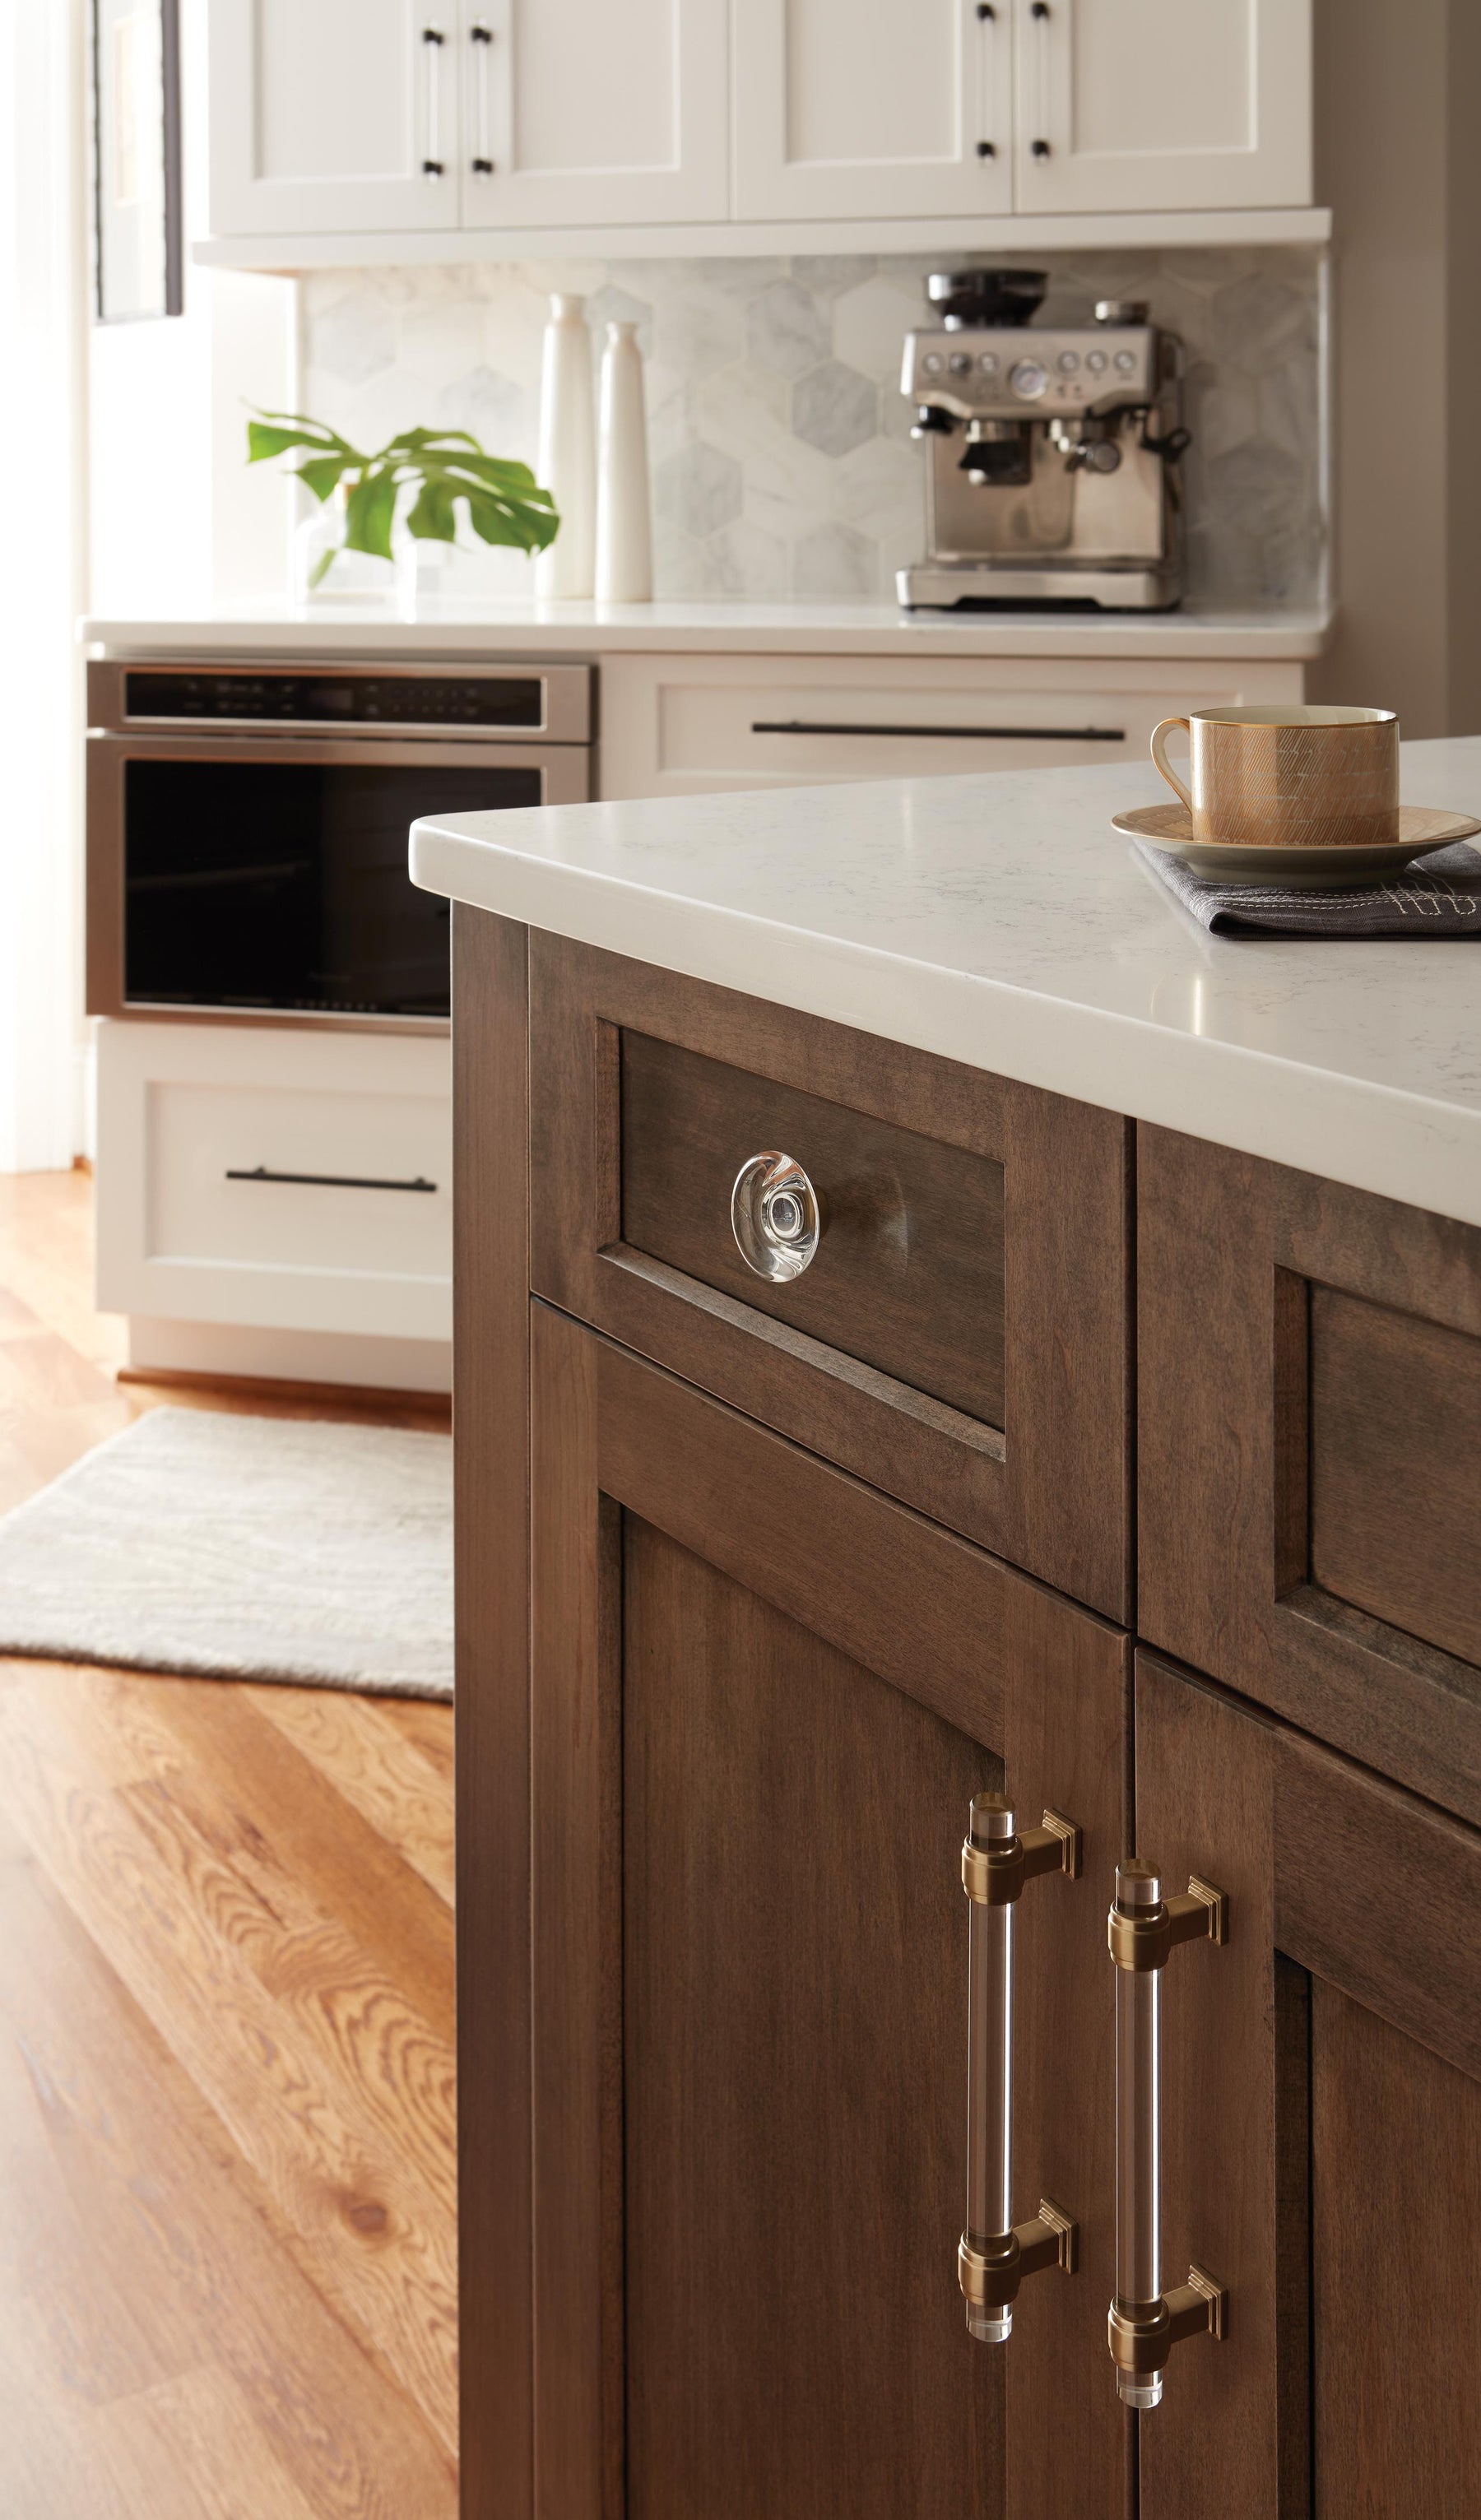 How Knobs and Pulls Can Enhance Your Kitchen